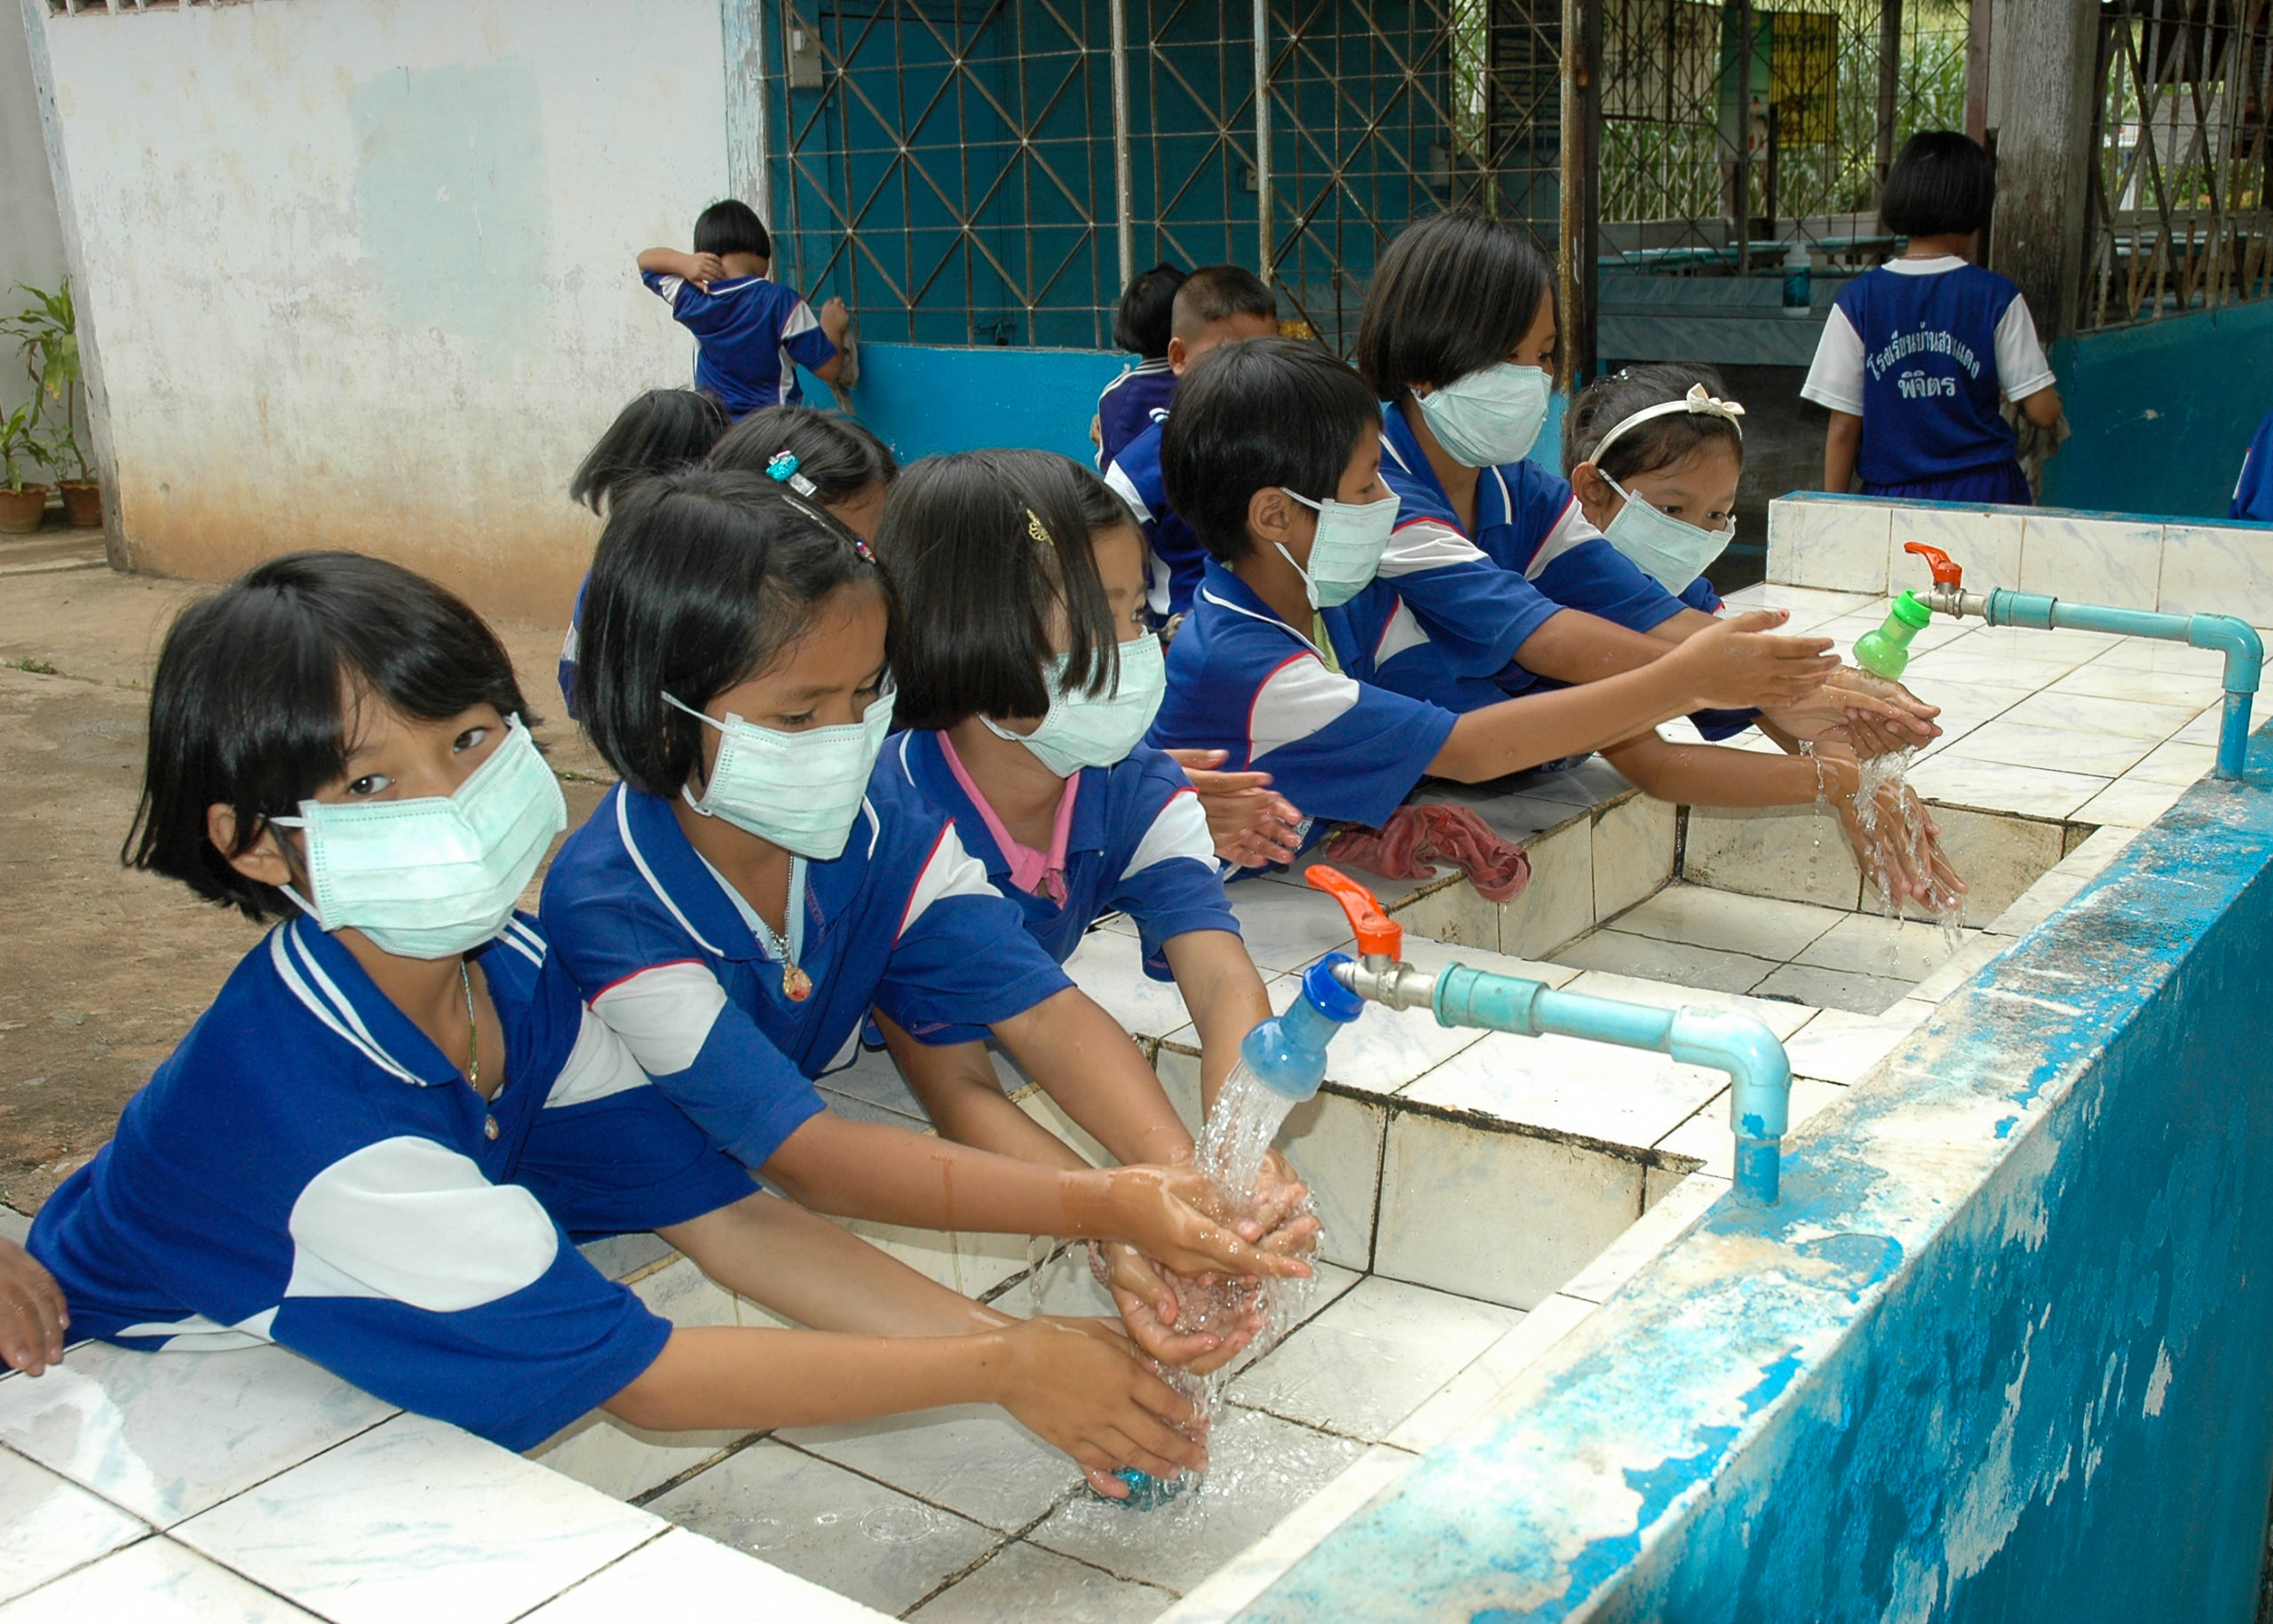 group of children in uniforms and masks washing their hands